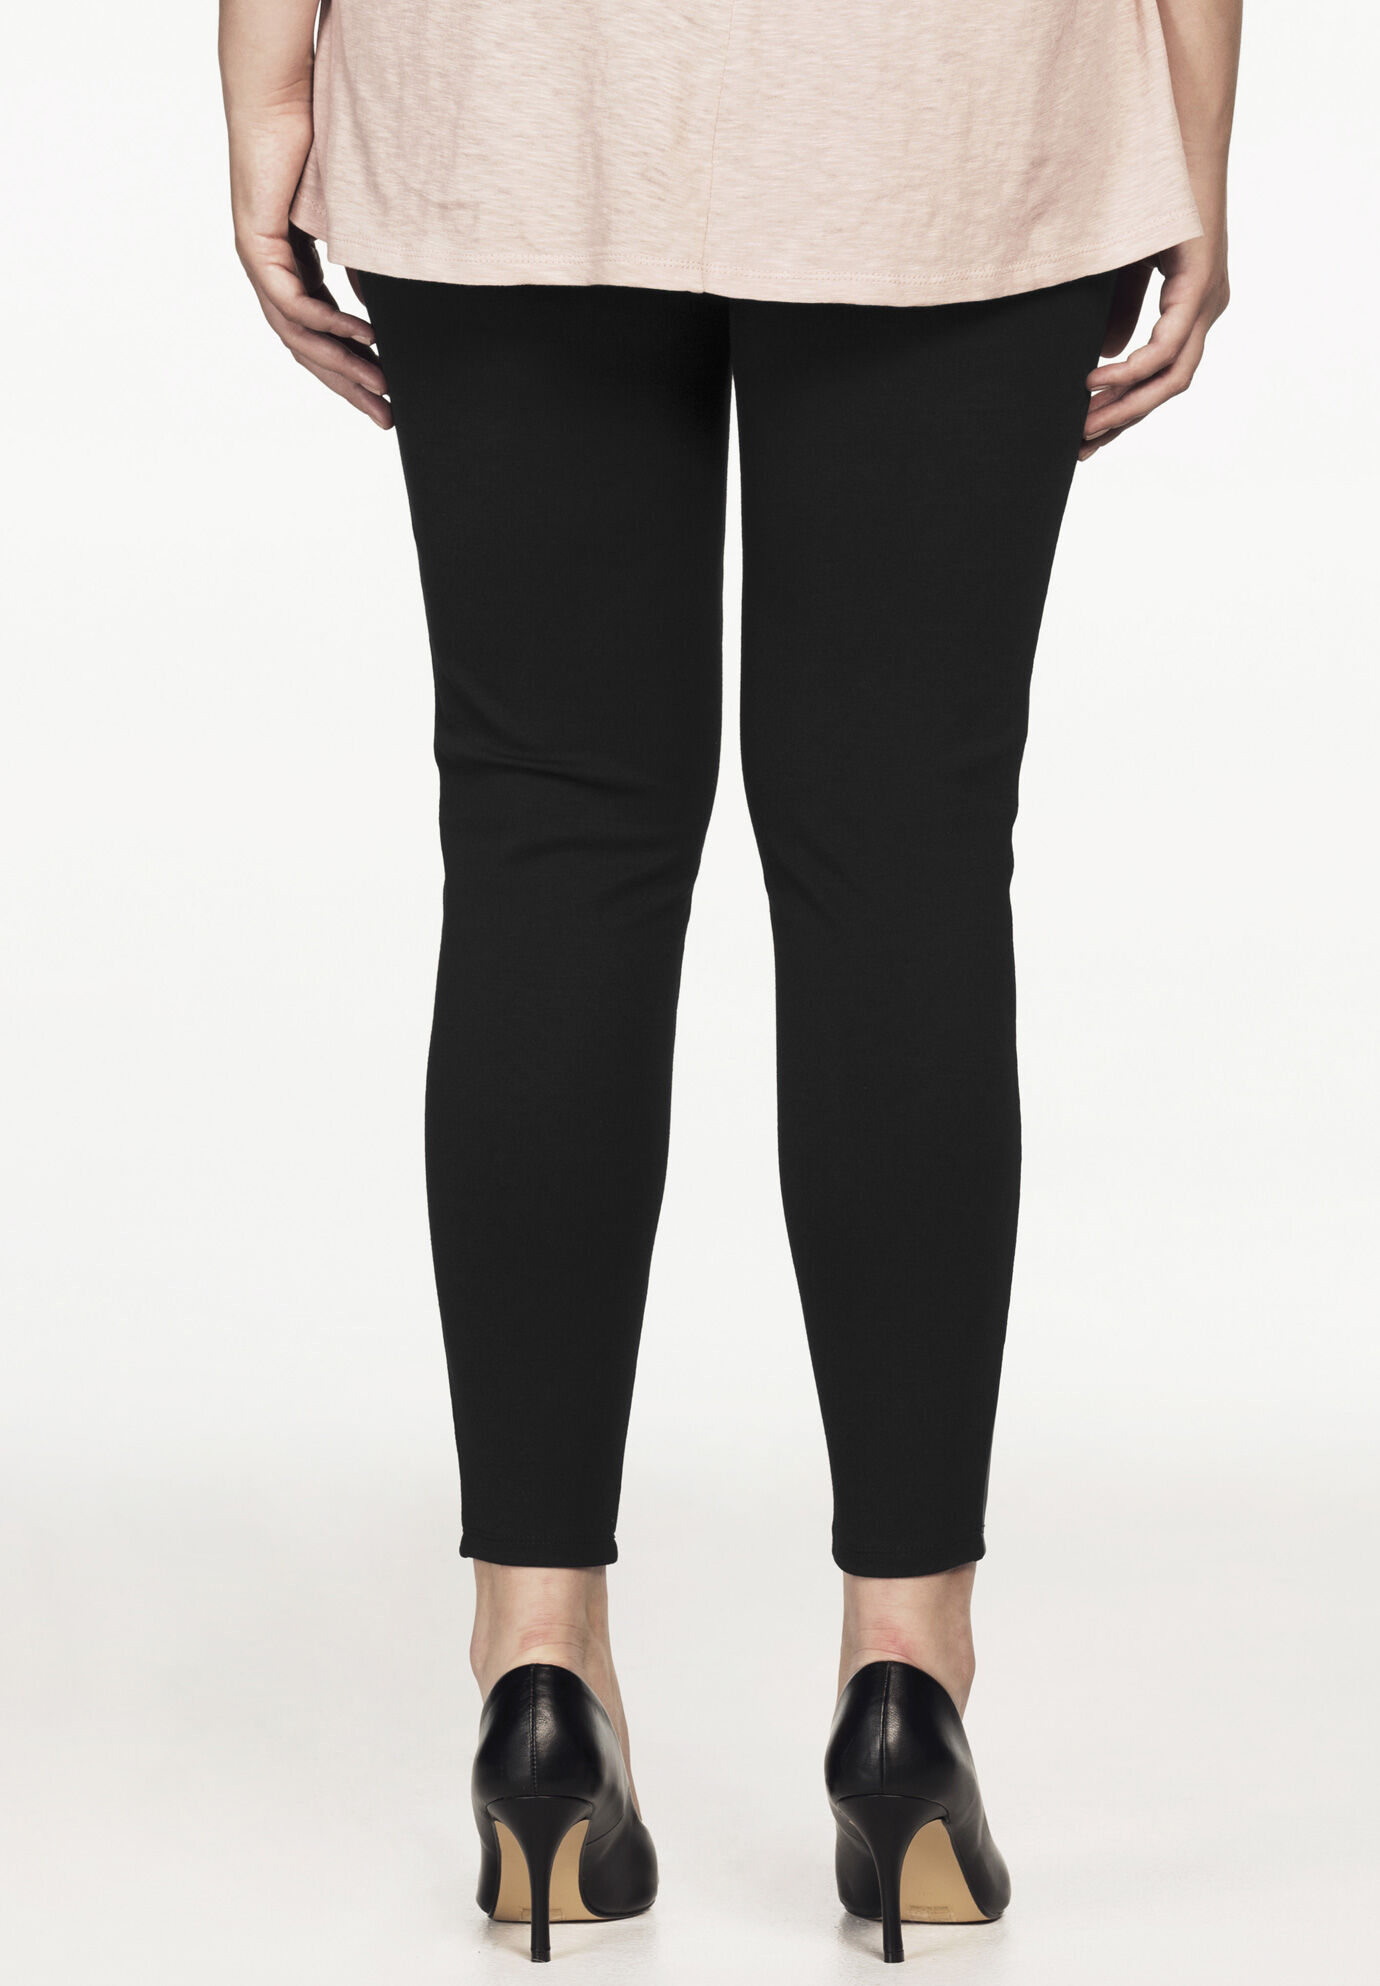 The Faux Leather Front Legging in Black - Get great deals at JustFab